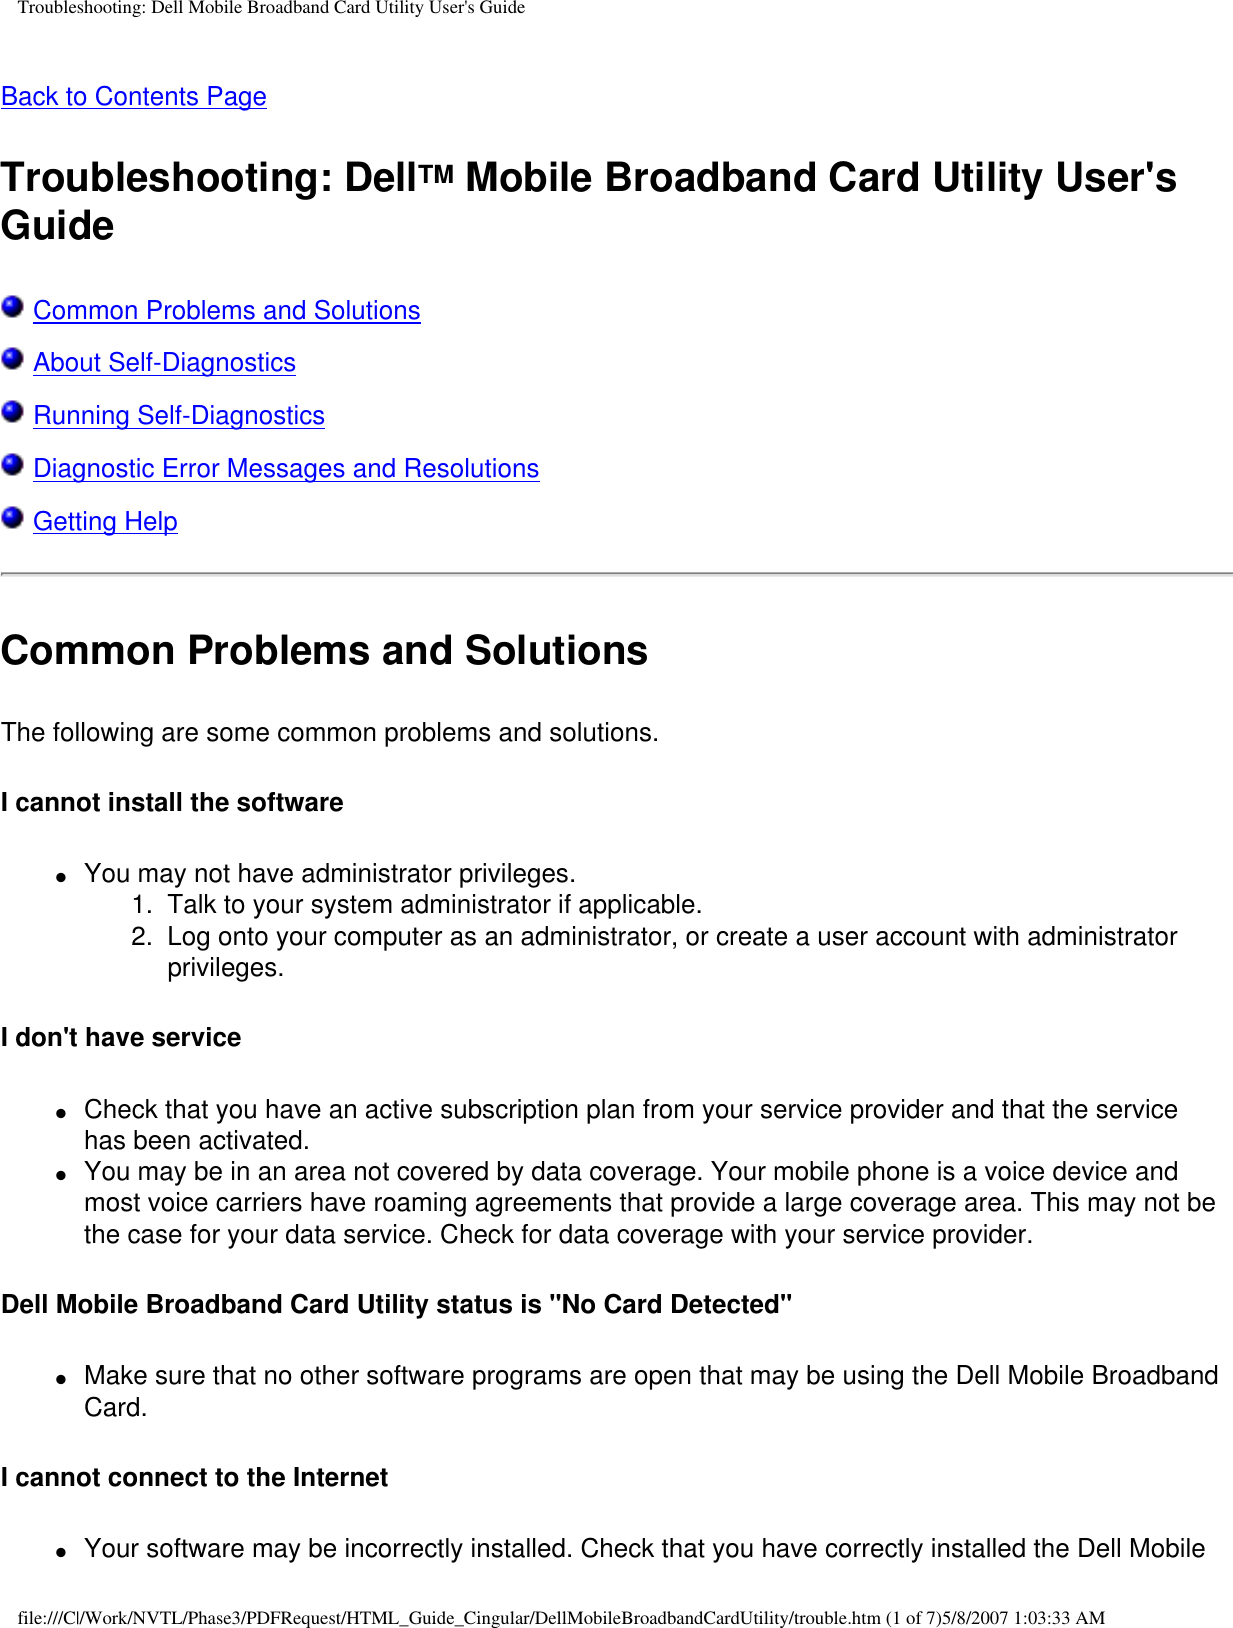 Troubleshooting: Dell Mobile Broadband Card Utility User&apos;s GuideBack to Contents PageTroubleshooting: DellTM Mobile Broadband Card Utility User&apos;s Guide Common Problems and Solutions  About Self-Diagnostics  Running Self-Diagnostics  Diagnostic Error Messages and Resolutions  Getting HelpCommon Problems and SolutionsThe following are some common problems and solutions.I cannot install the software●     You may not have administrator privileges.1.  Talk to your system administrator if applicable.2.  Log onto your computer as an administrator, or create a user account with administrator privileges.I don&apos;t have service●     Check that you have an active subscription plan from your service provider and that the service has been activated.●     You may be in an area not covered by data coverage. Your mobile phone is a voice device and most voice carriers have roaming agreements that provide a large coverage area. This may not be the case for your data service. Check for data coverage with your service provider.Dell Mobile Broadband Card Utility status is &quot;No Card Detected&quot;●     Make sure that no other software programs are open that may be using the Dell Mobile Broadband Card.I cannot connect to the Internet●     Your software may be incorrectly installed. Check that you have correctly installed the Dell Mobile file:///C|/Work/NVTL/Phase3/PDFRequest/HTML_Guide_Cingular/DellMobileBroadbandCardUtility/trouble.htm (1 of 7)5/8/2007 1:03:33 AM